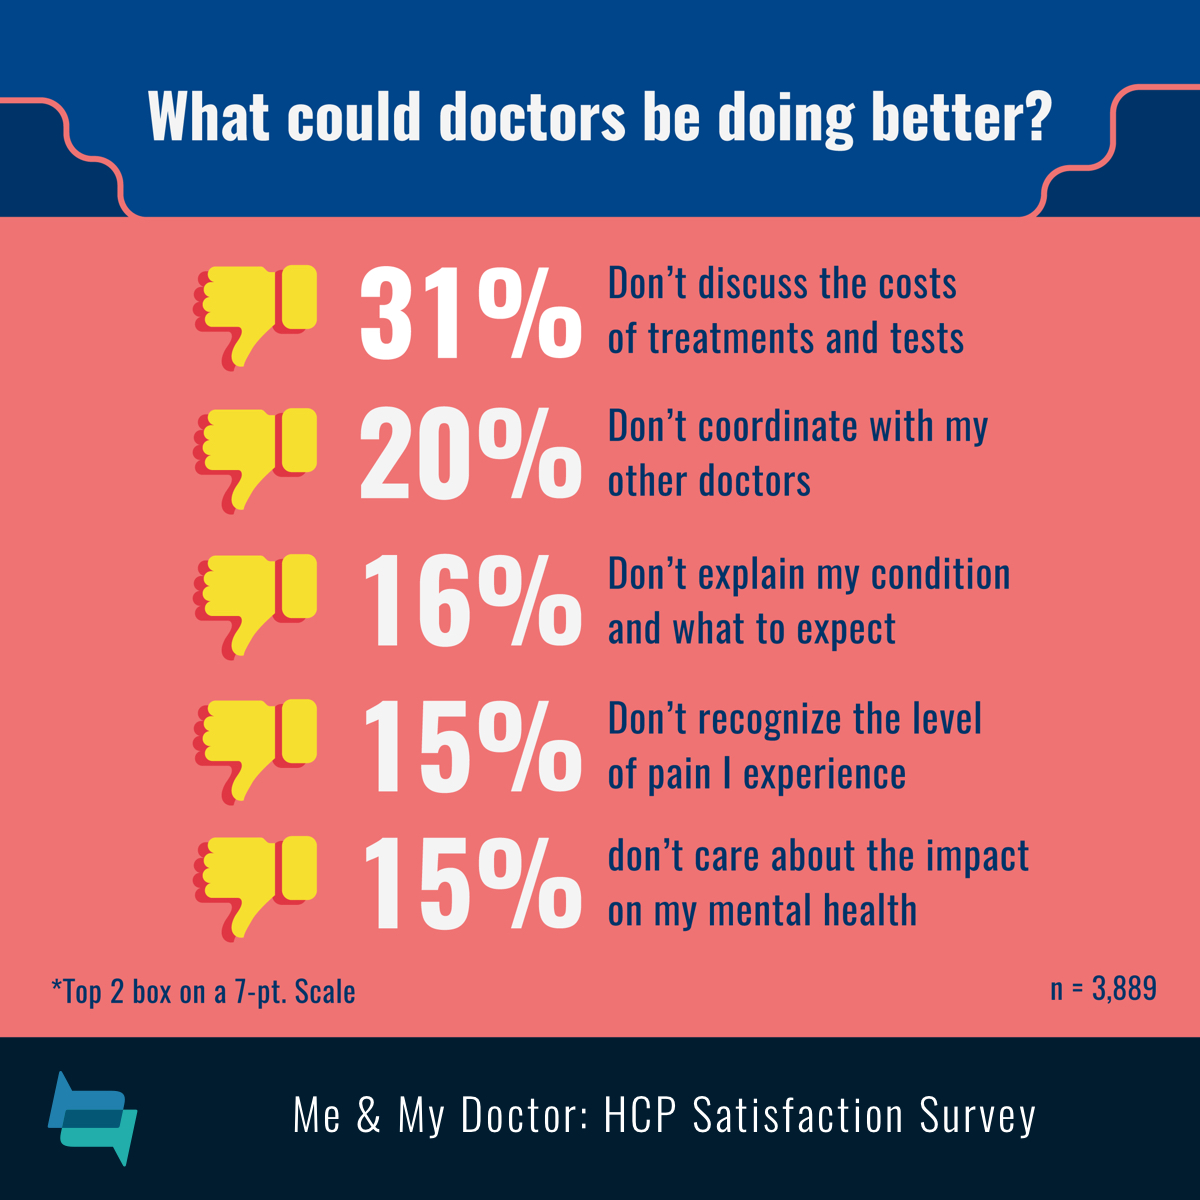 Doctors don't explain cost (31%) and expectations (16%), don't coordinate with other doctors (20%), don't see pain (15%), neglect mental health.